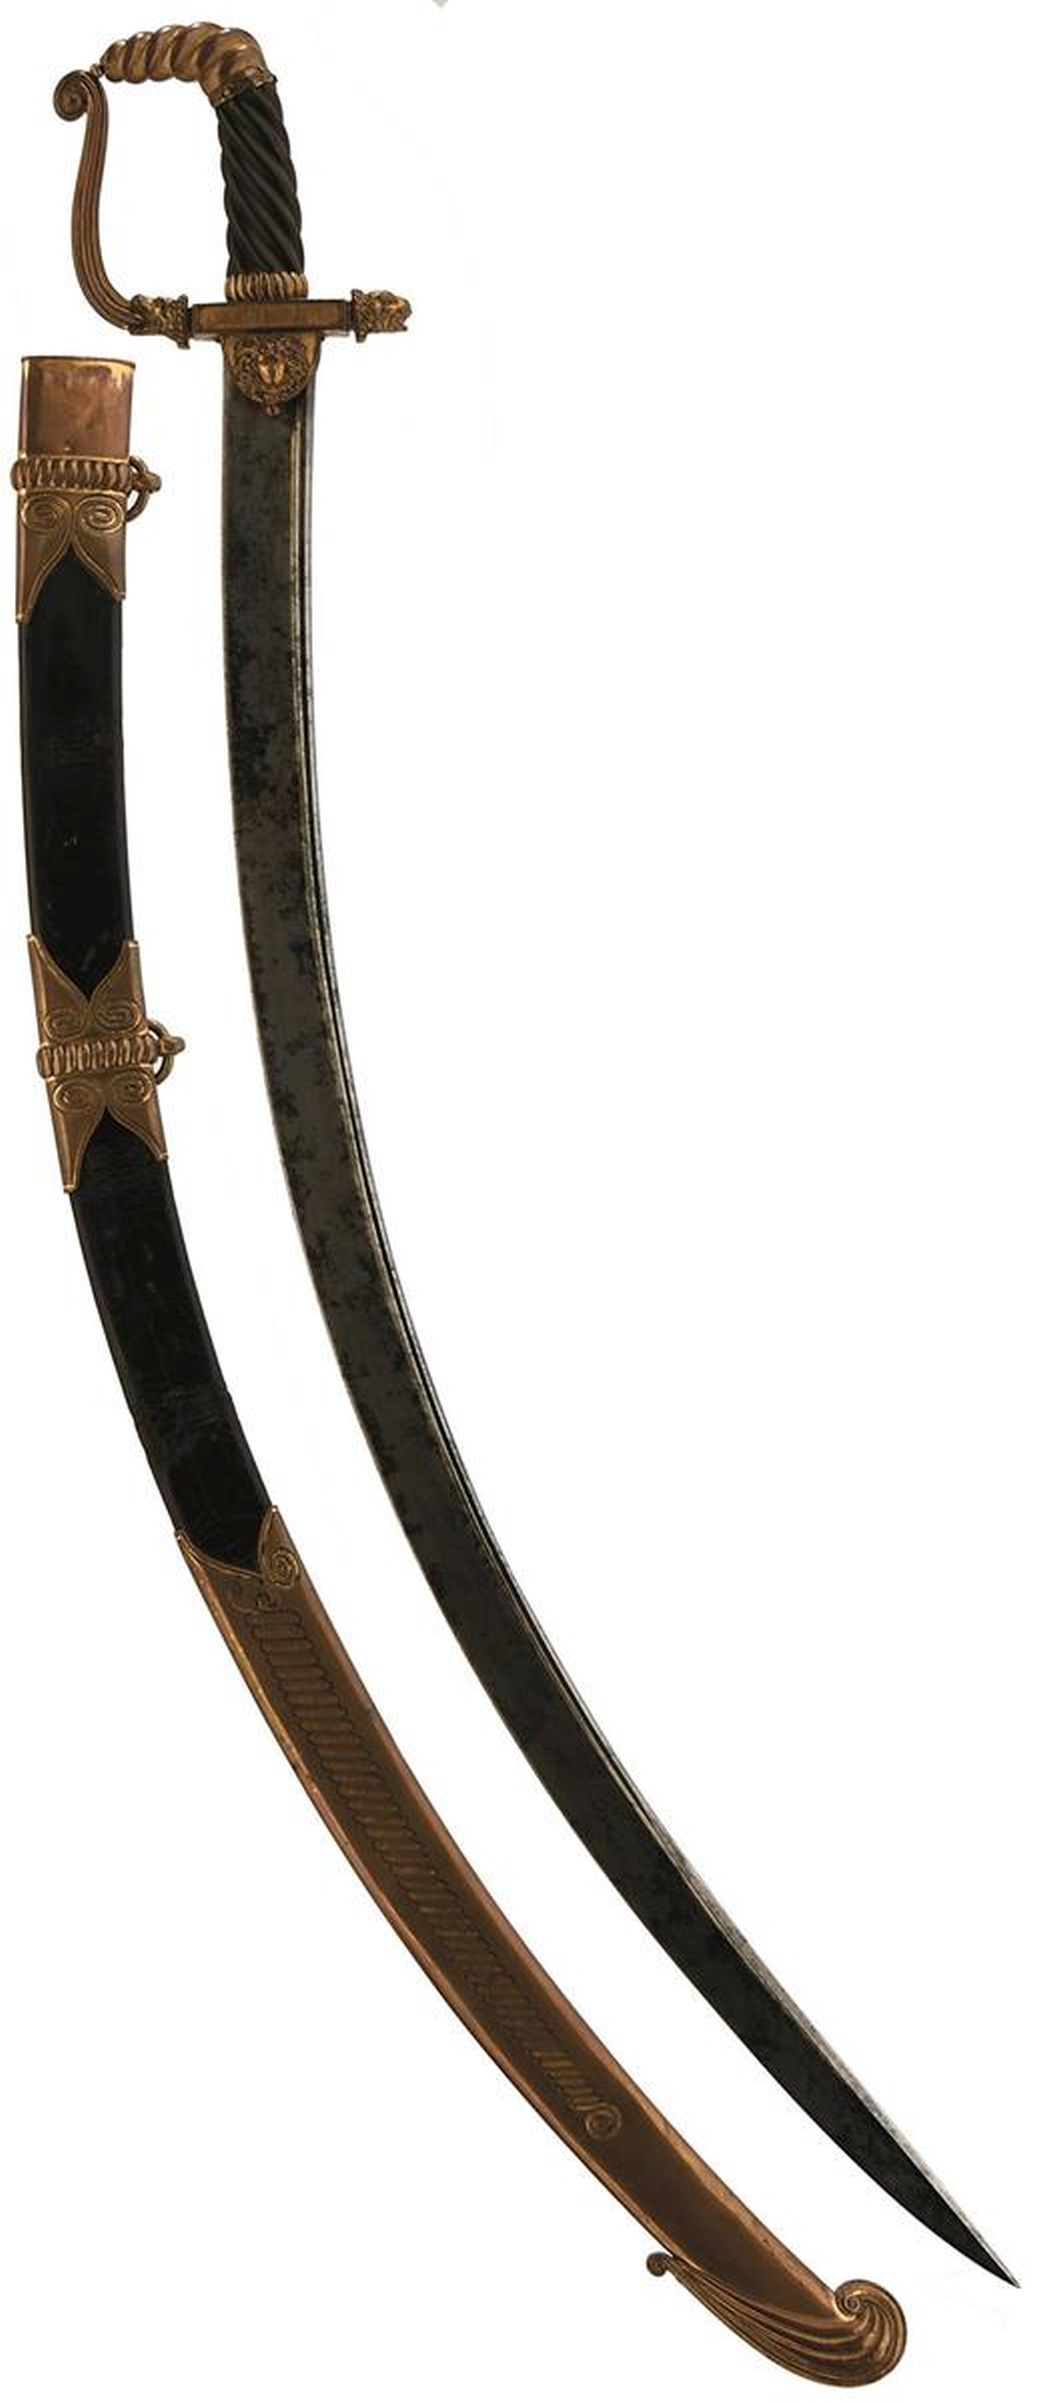 A LATE 18TH OR EARLY 19TH CENTURY PRESENTATION QUALITY SABRE BY PROSSER, 83cm sharply curved pipe-